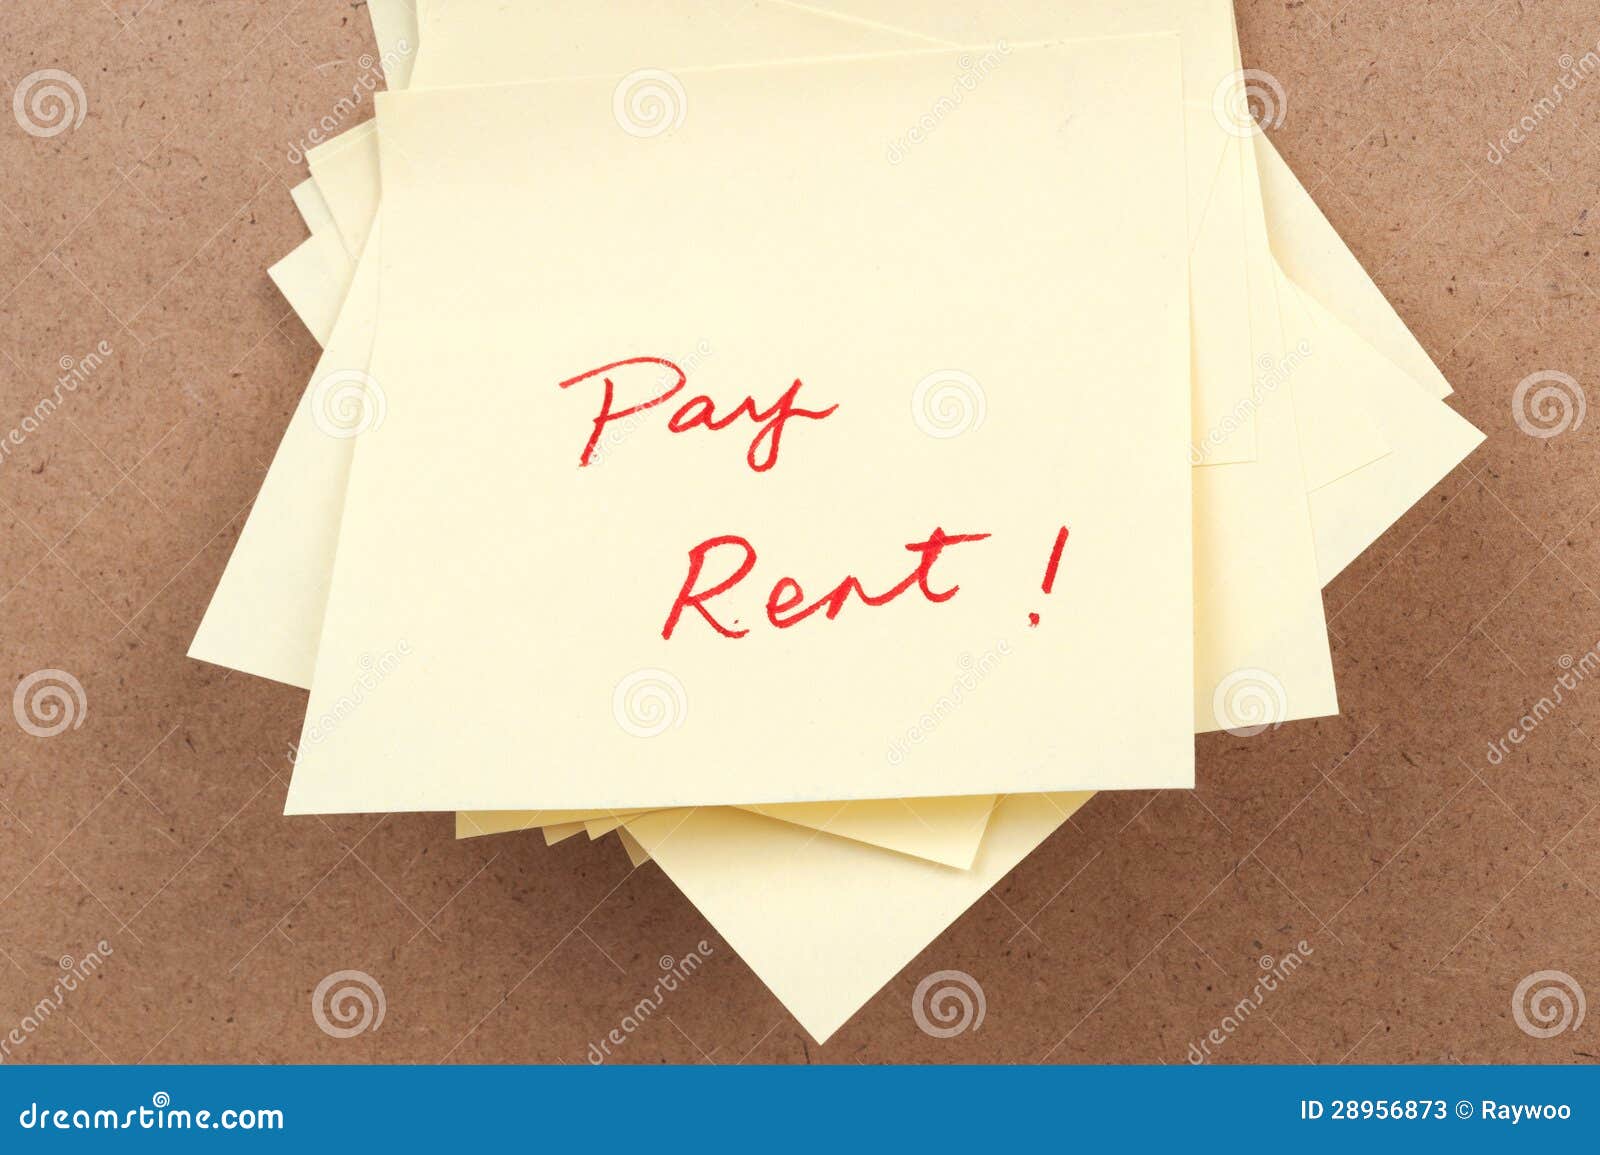 pay rent words